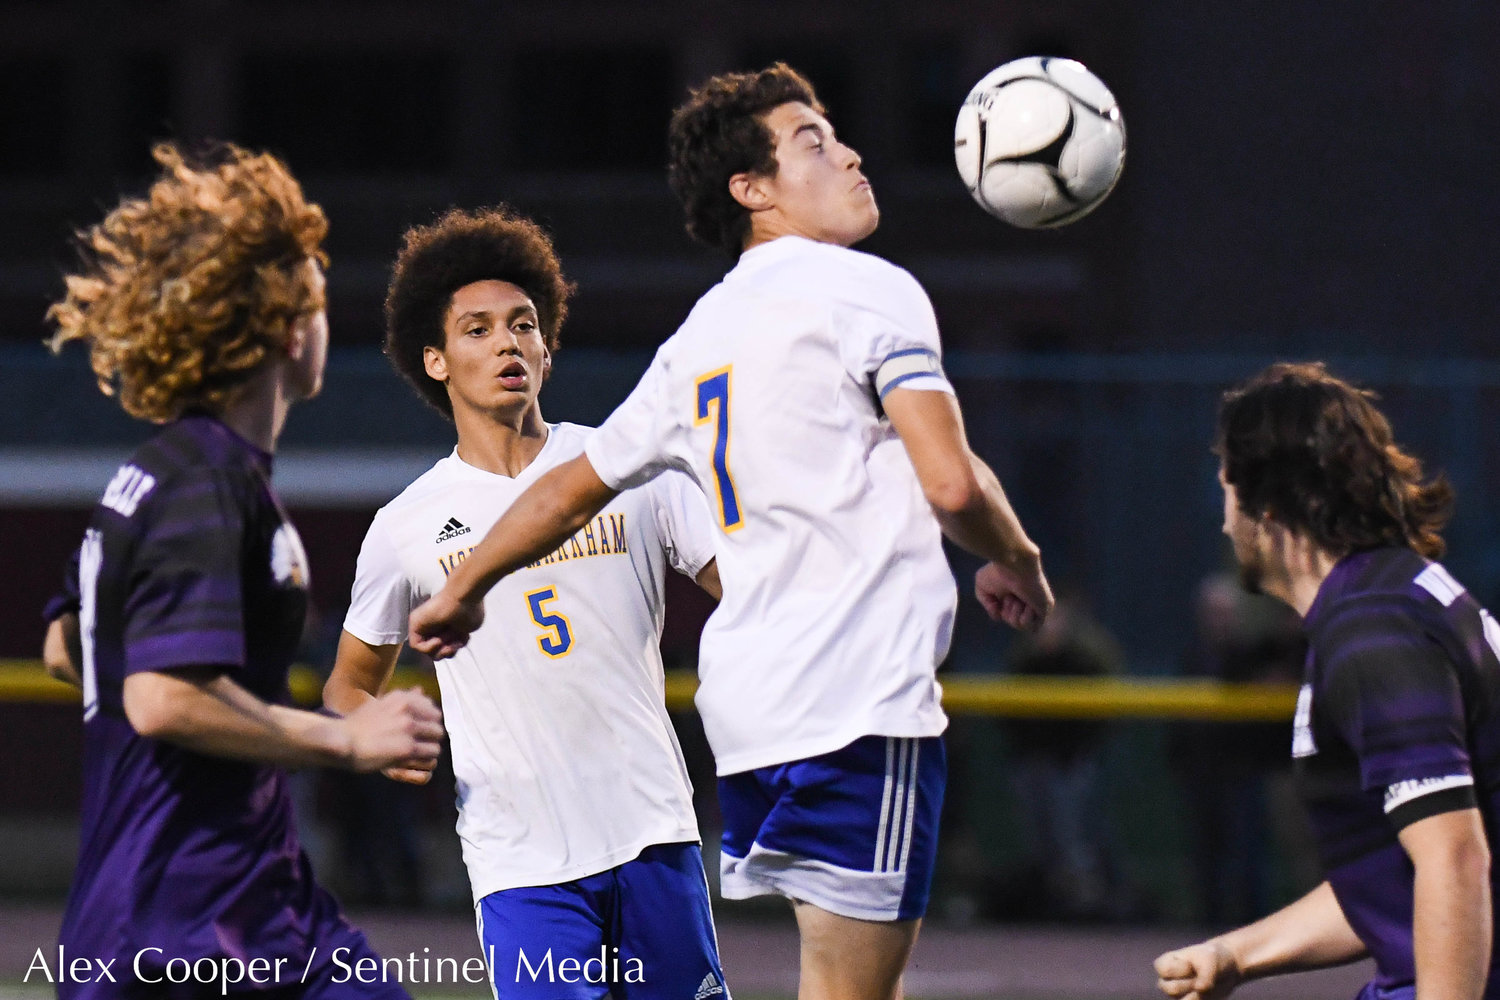 Waterville plays Mt. Markham in the Class C boys soccer semifinals on Wednesday, Oct. 26 at Canastota. Waterville won 2-1.